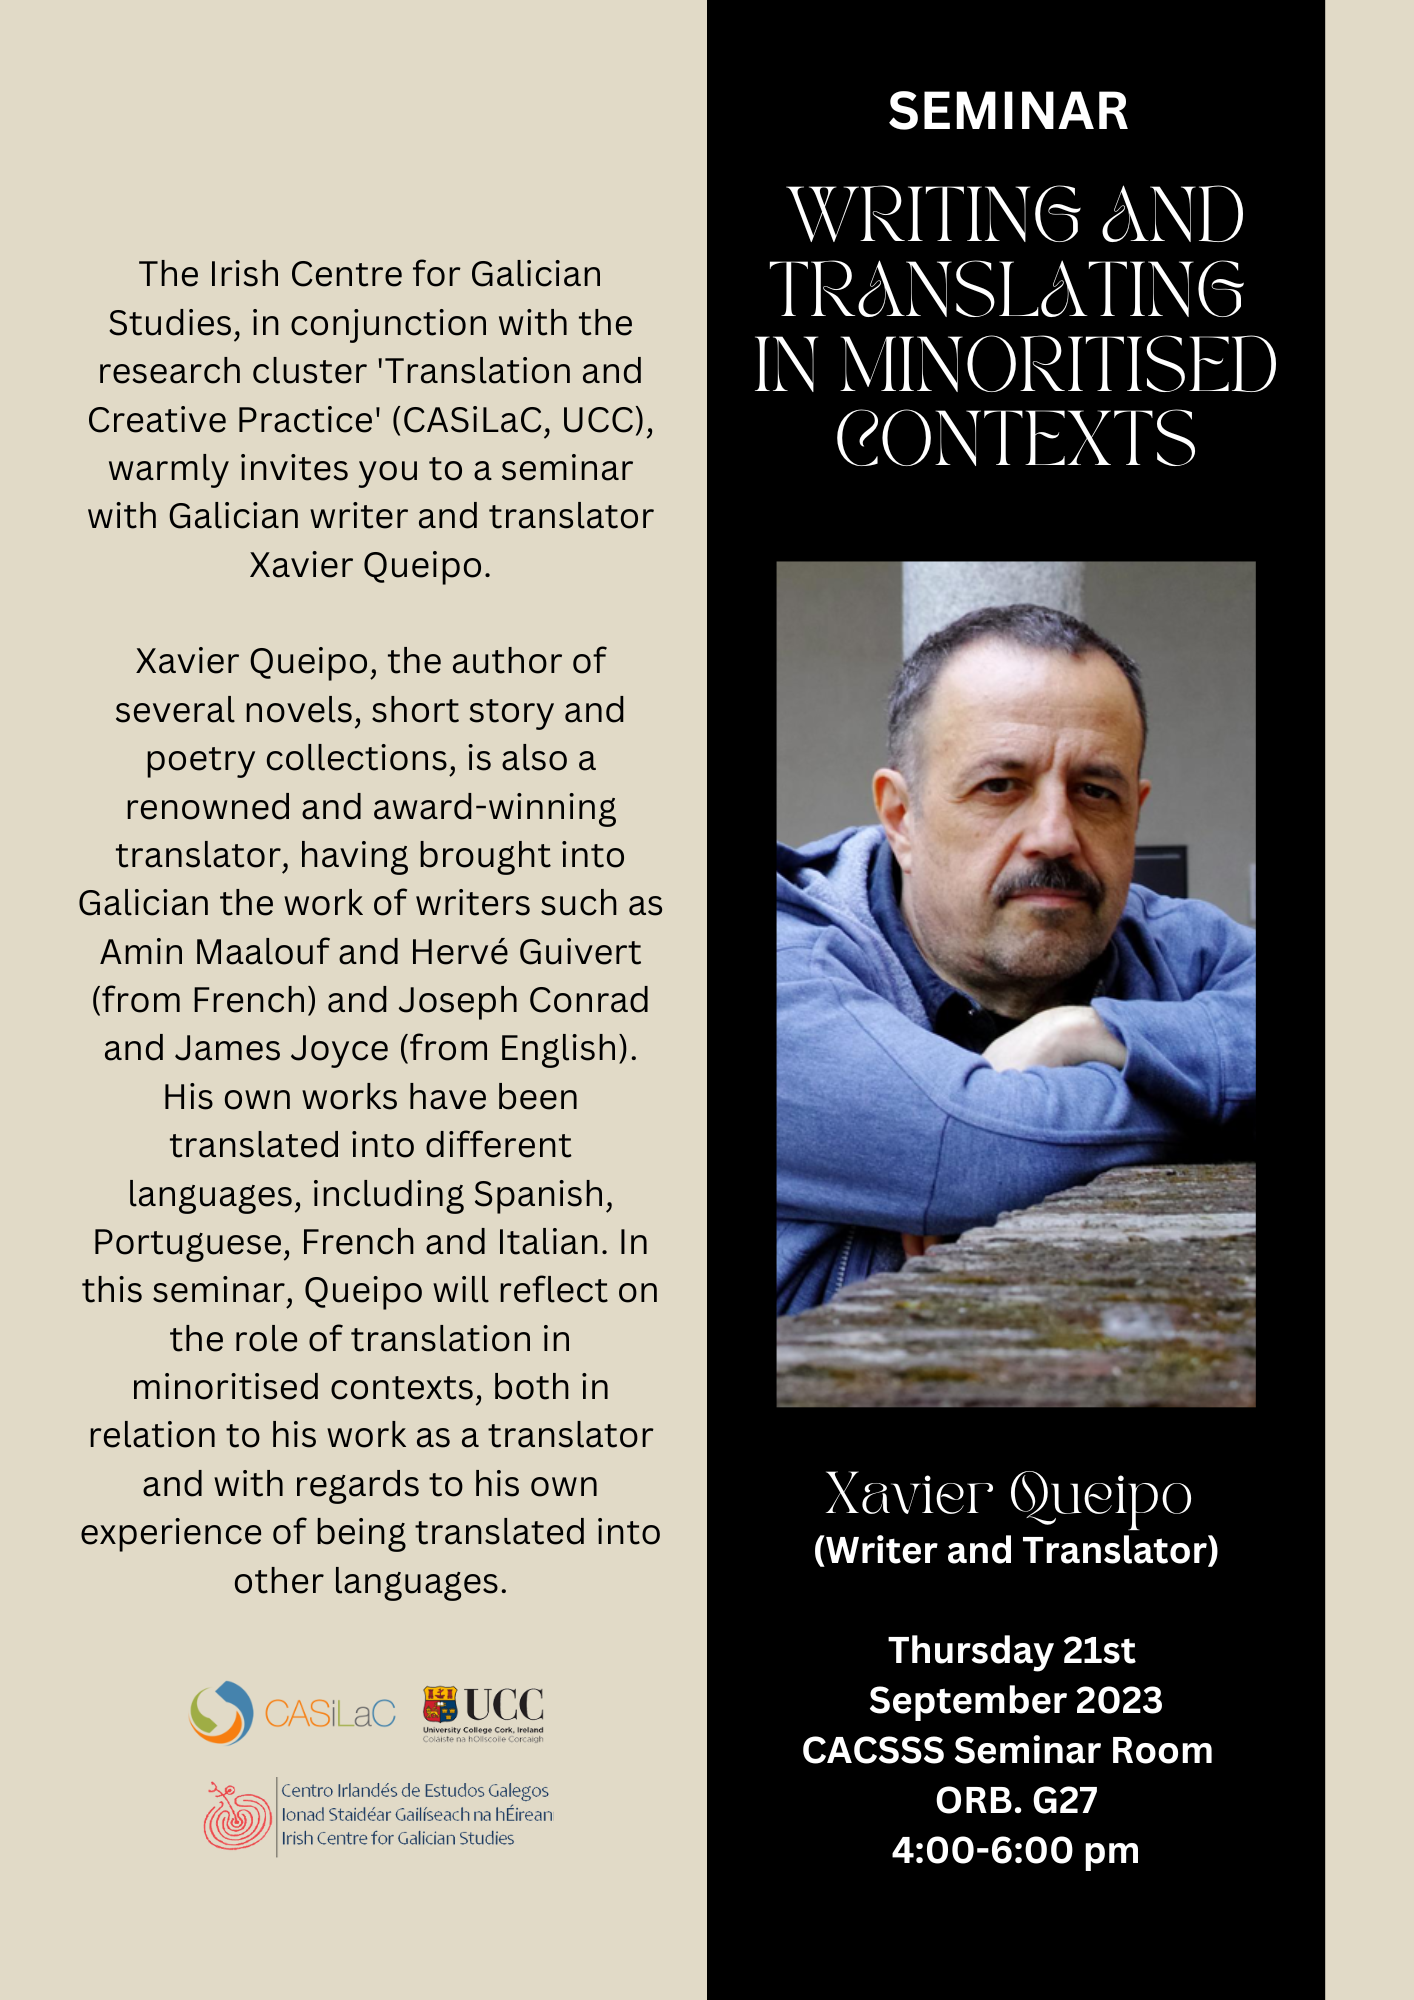 SEMINAR
Writing and Translating in Minoritised Contexts
Xavier Queipo (Writer and Translator)
Thursday 21st September 2023
CACSSS Seminar Room - ORB. G27
4:00-6:00 pm